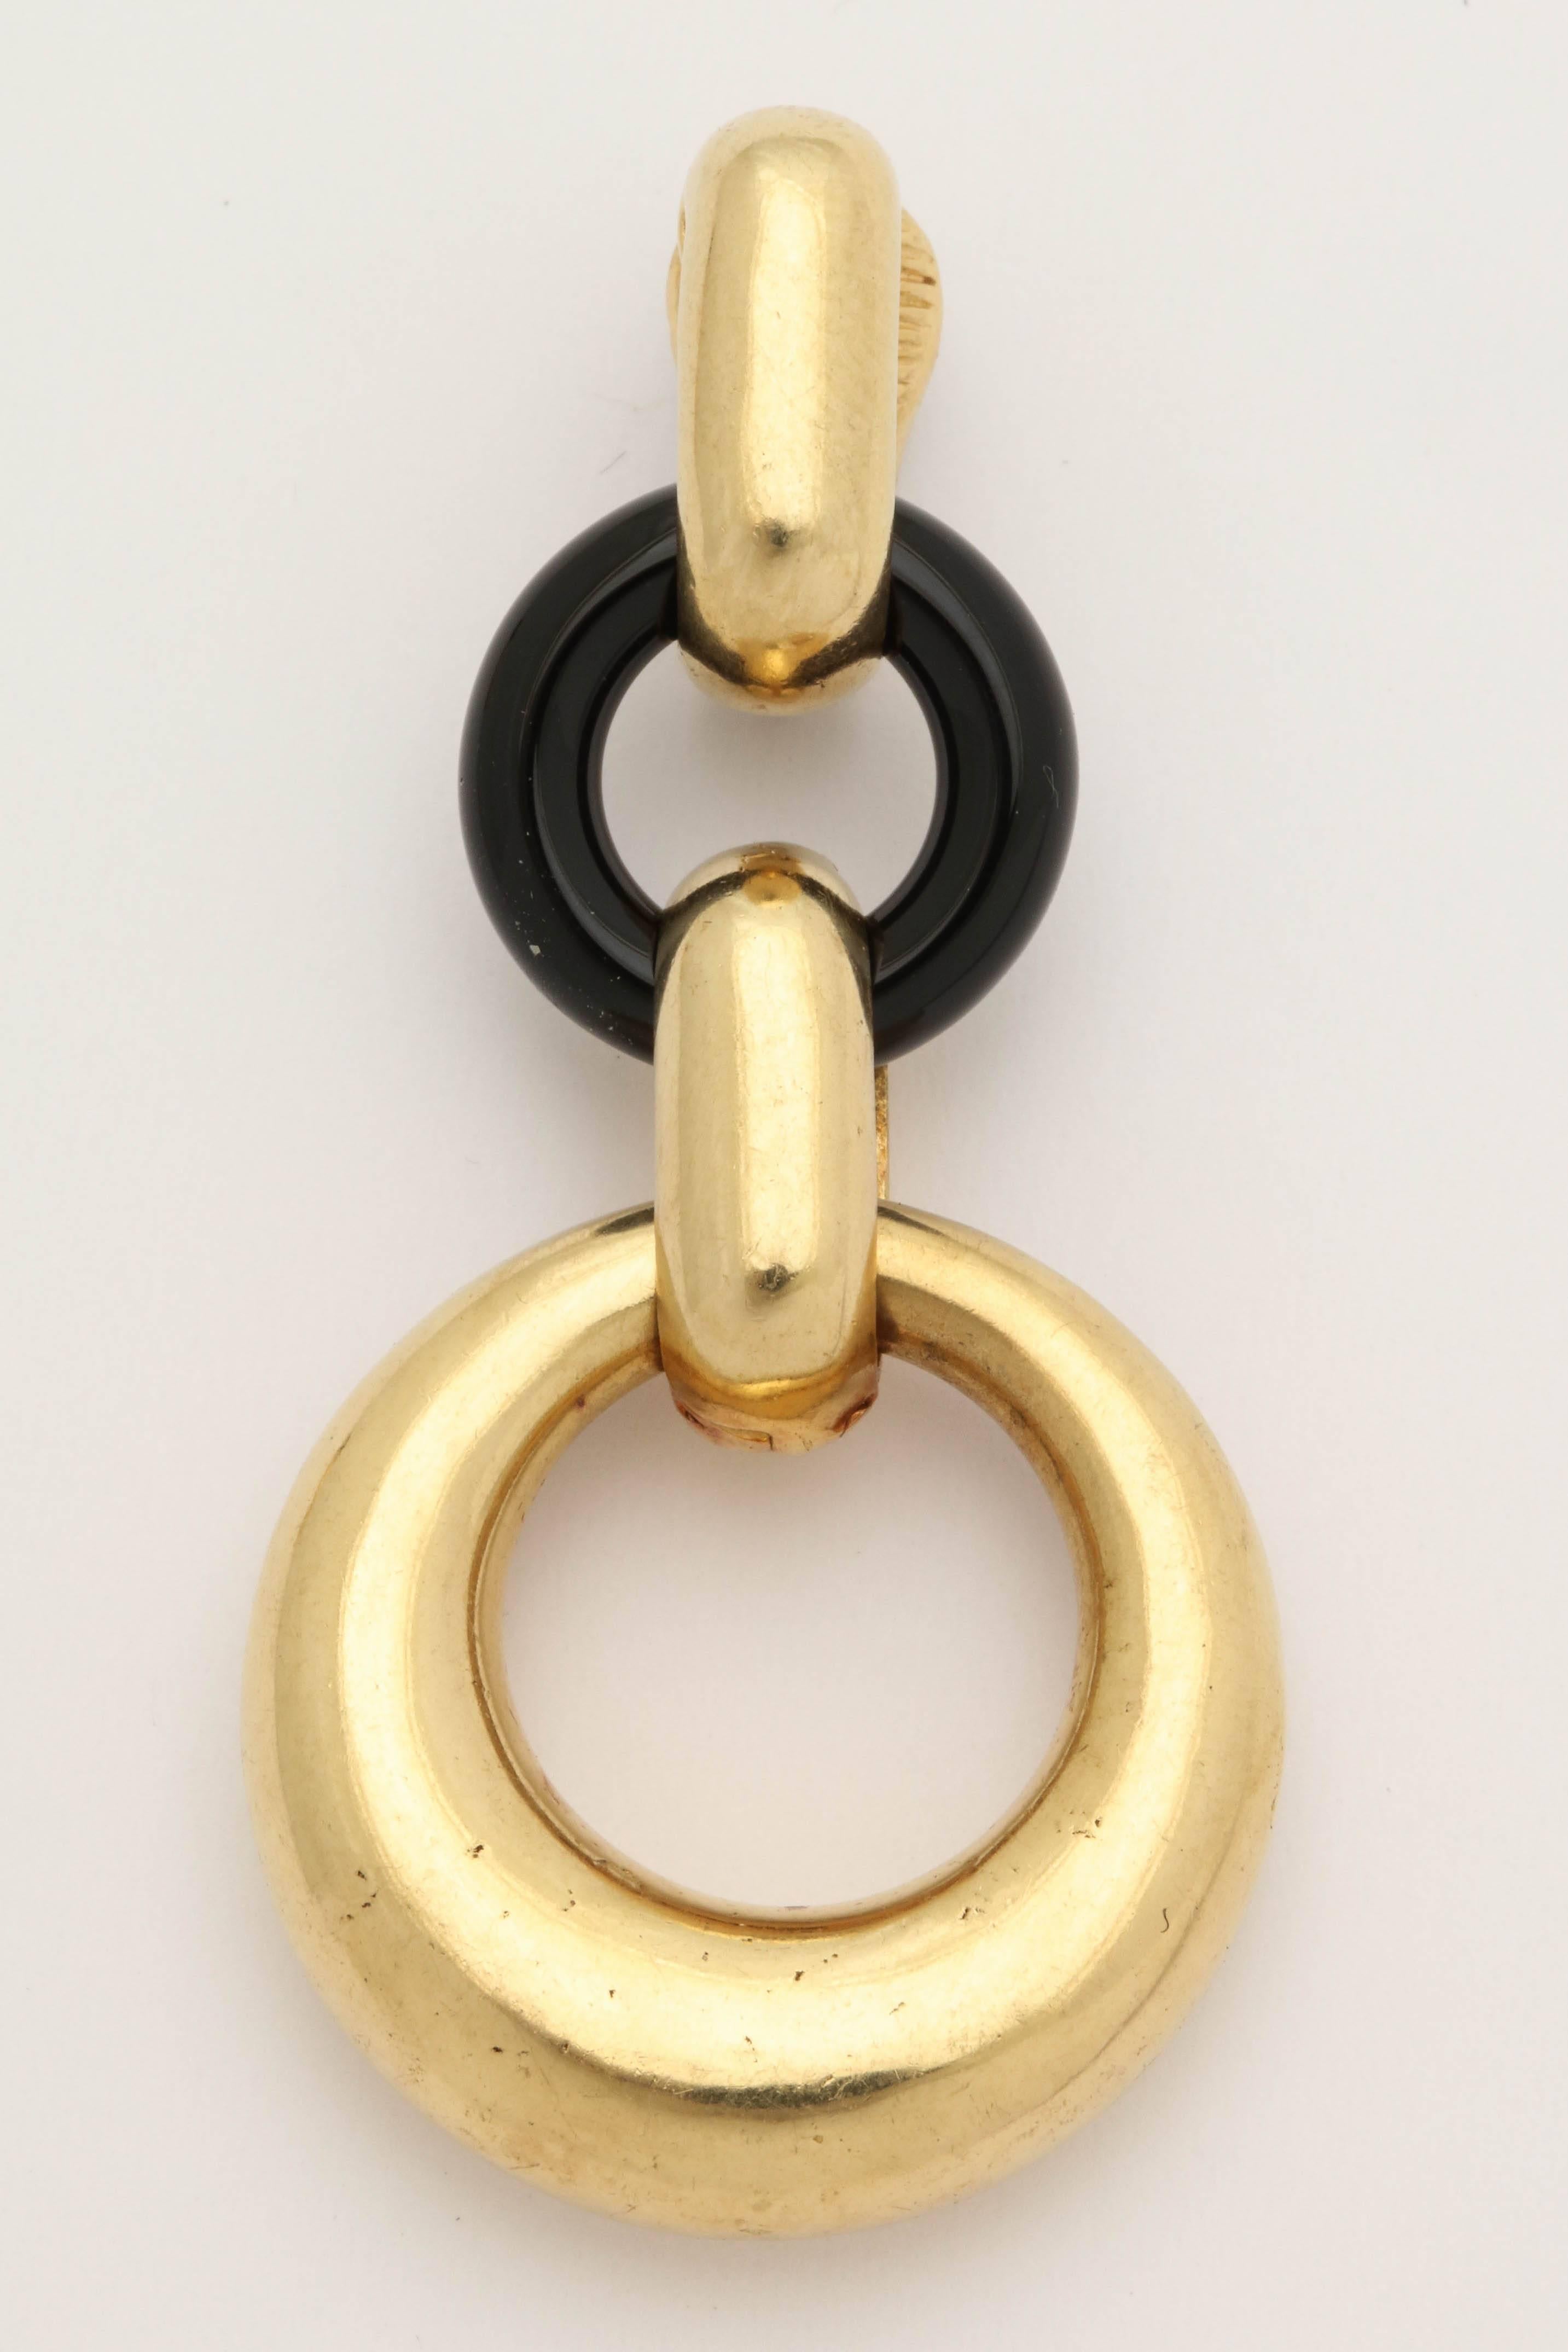 One Pair Of Ladies 18kt High Polish Gold Loop Link Hanging Earrings Intertwined With Two Custom Cut Open Link Onyx Stones.Made In America In The 1960's With Fancy High Quality Clip On Backs. NOTE: Posts May Be Added For Pierced Ears.